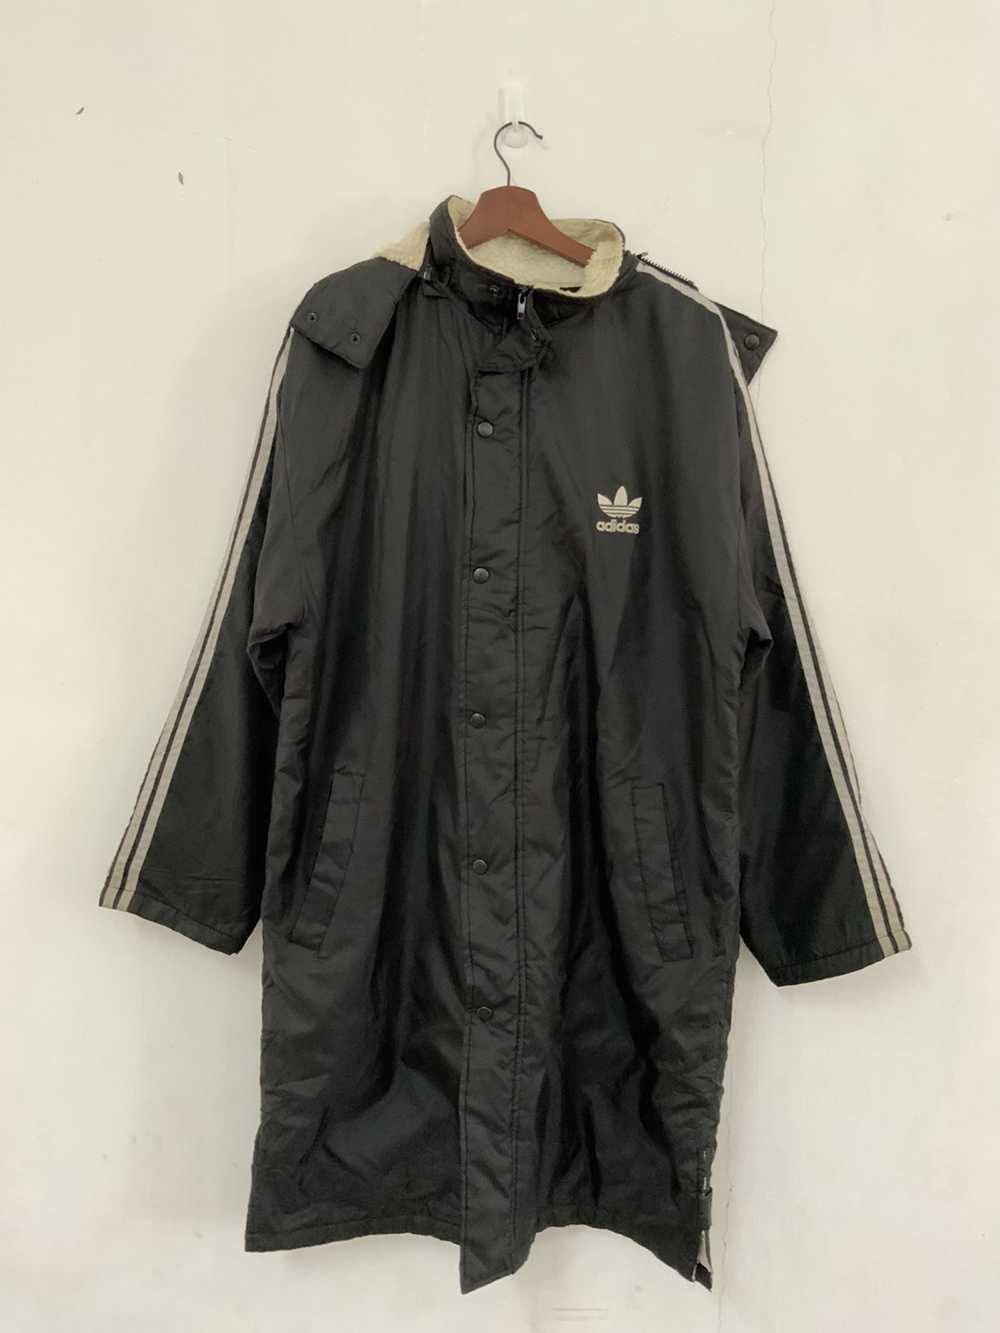 Adidas Vintage Adidas Mohair Fur Trench Coat - image 1